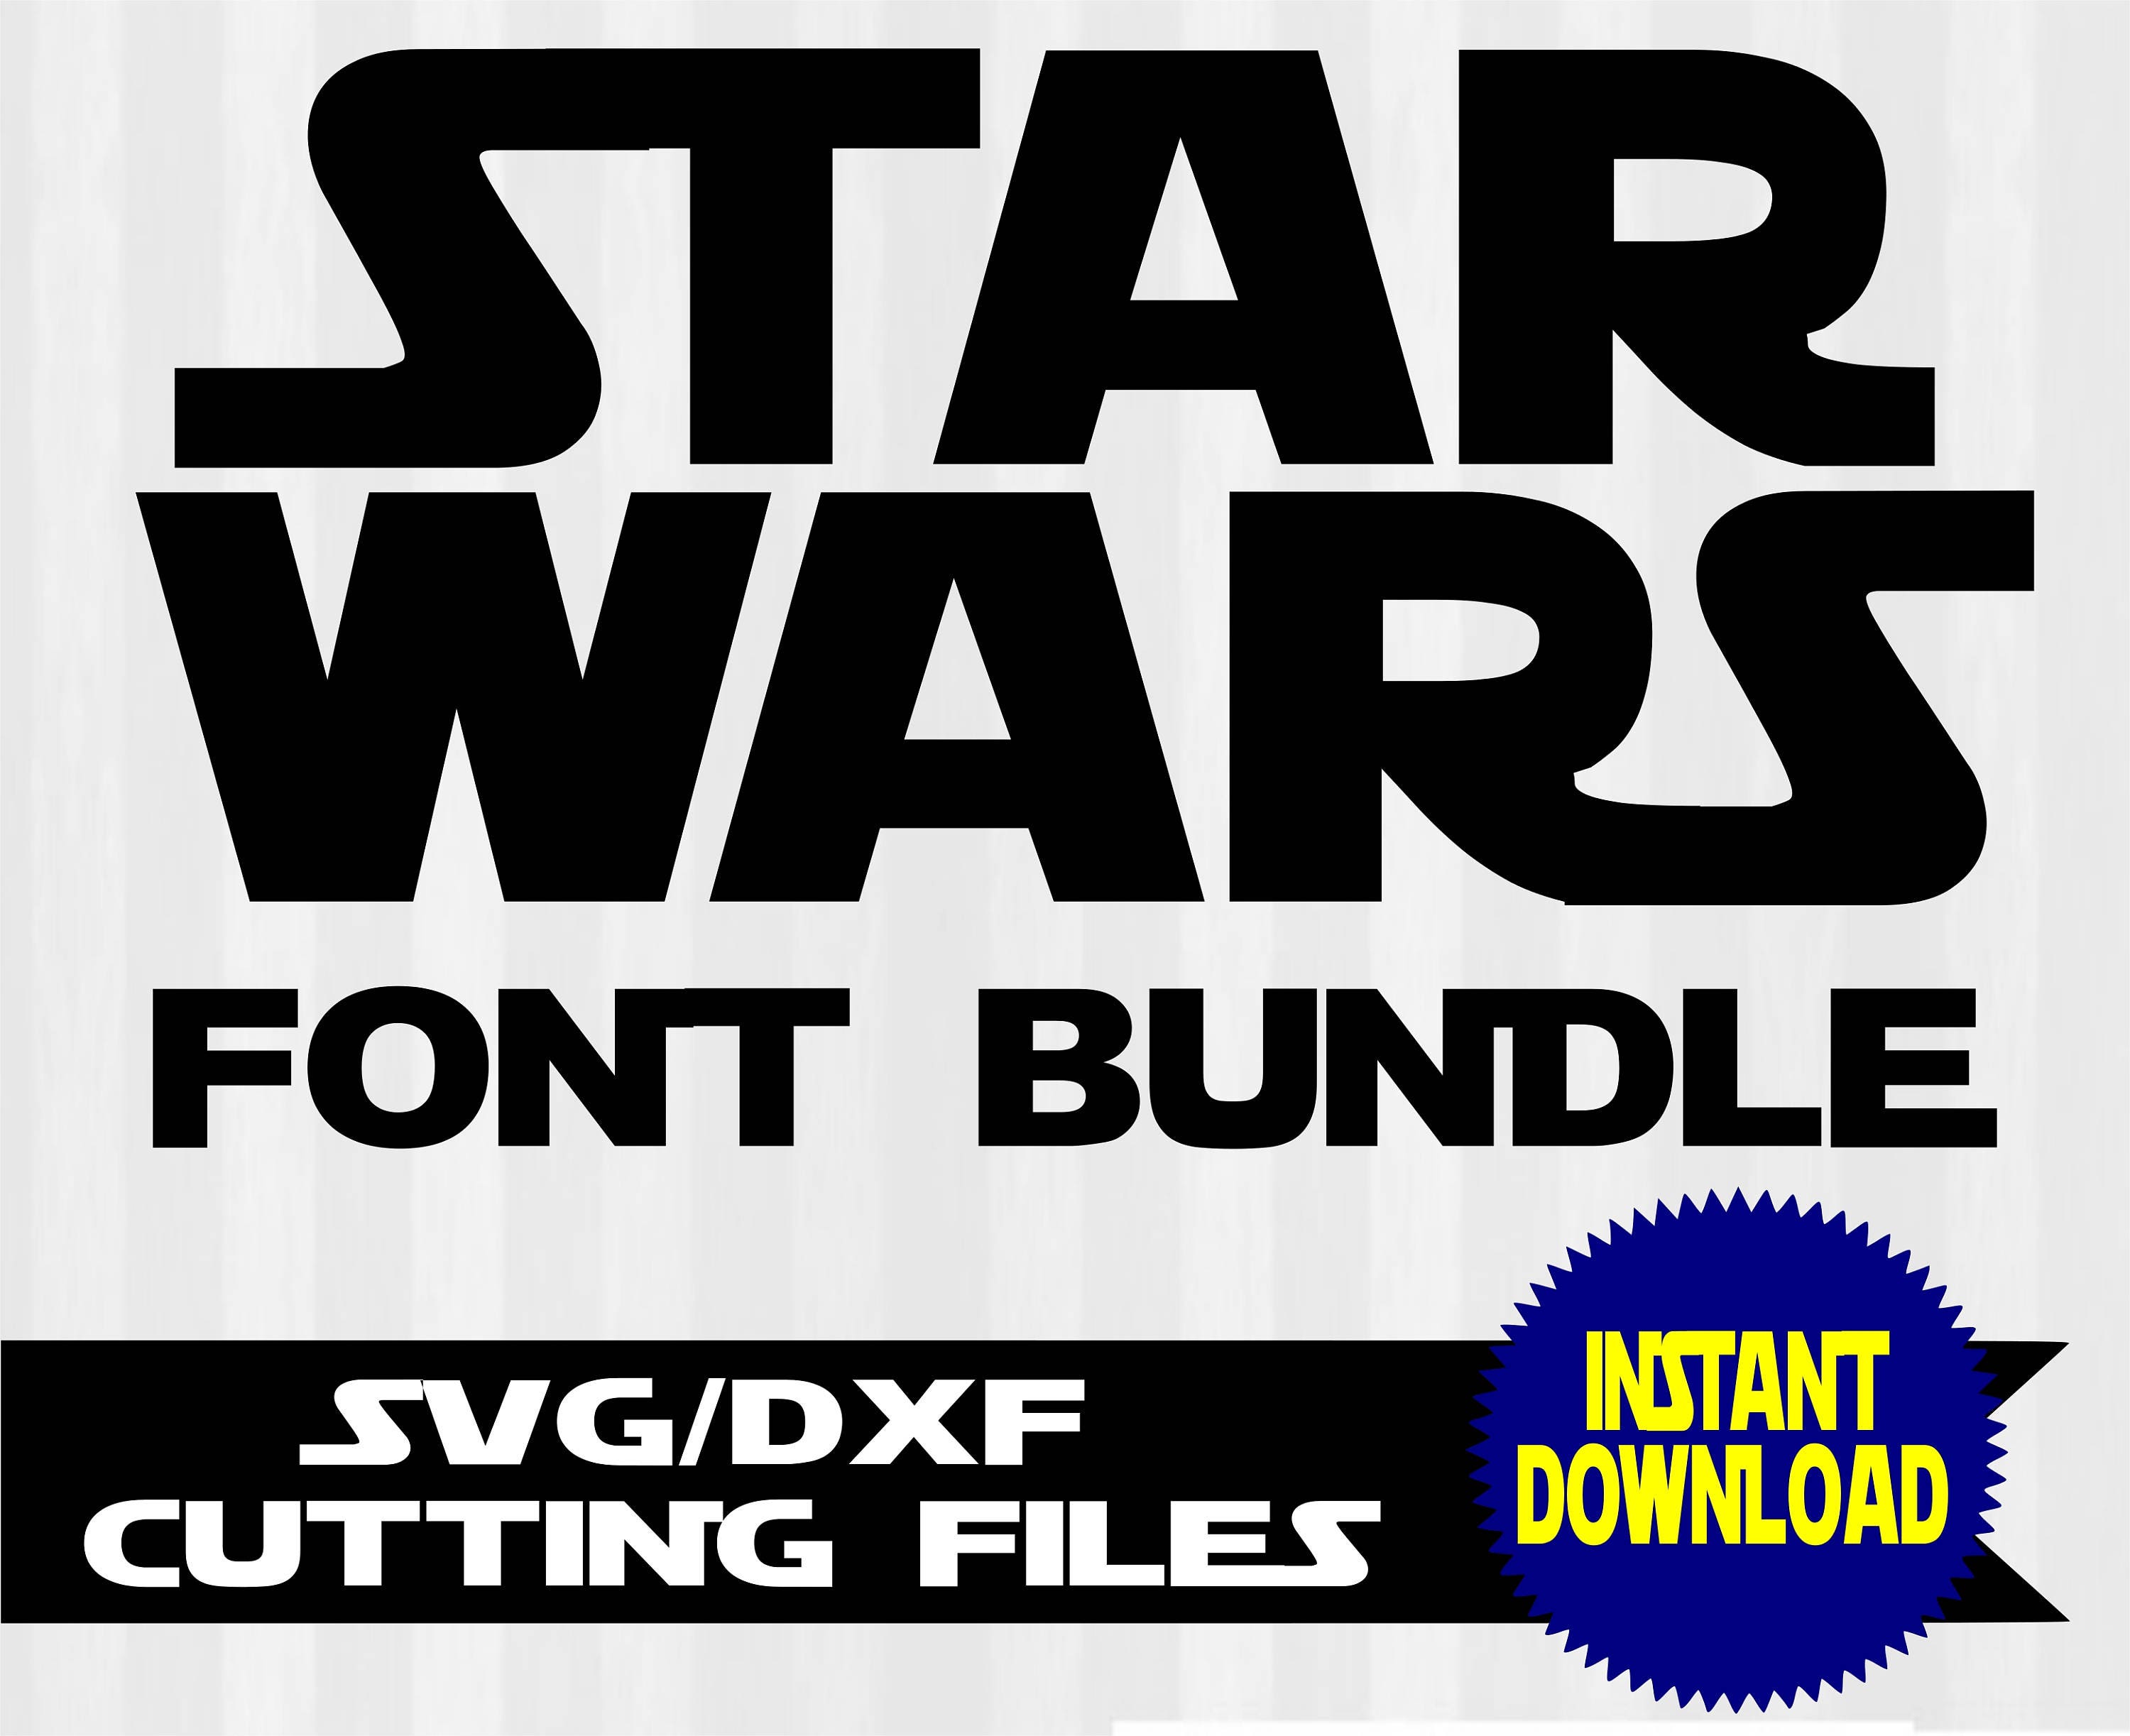 closest font to star wars on microsoft word